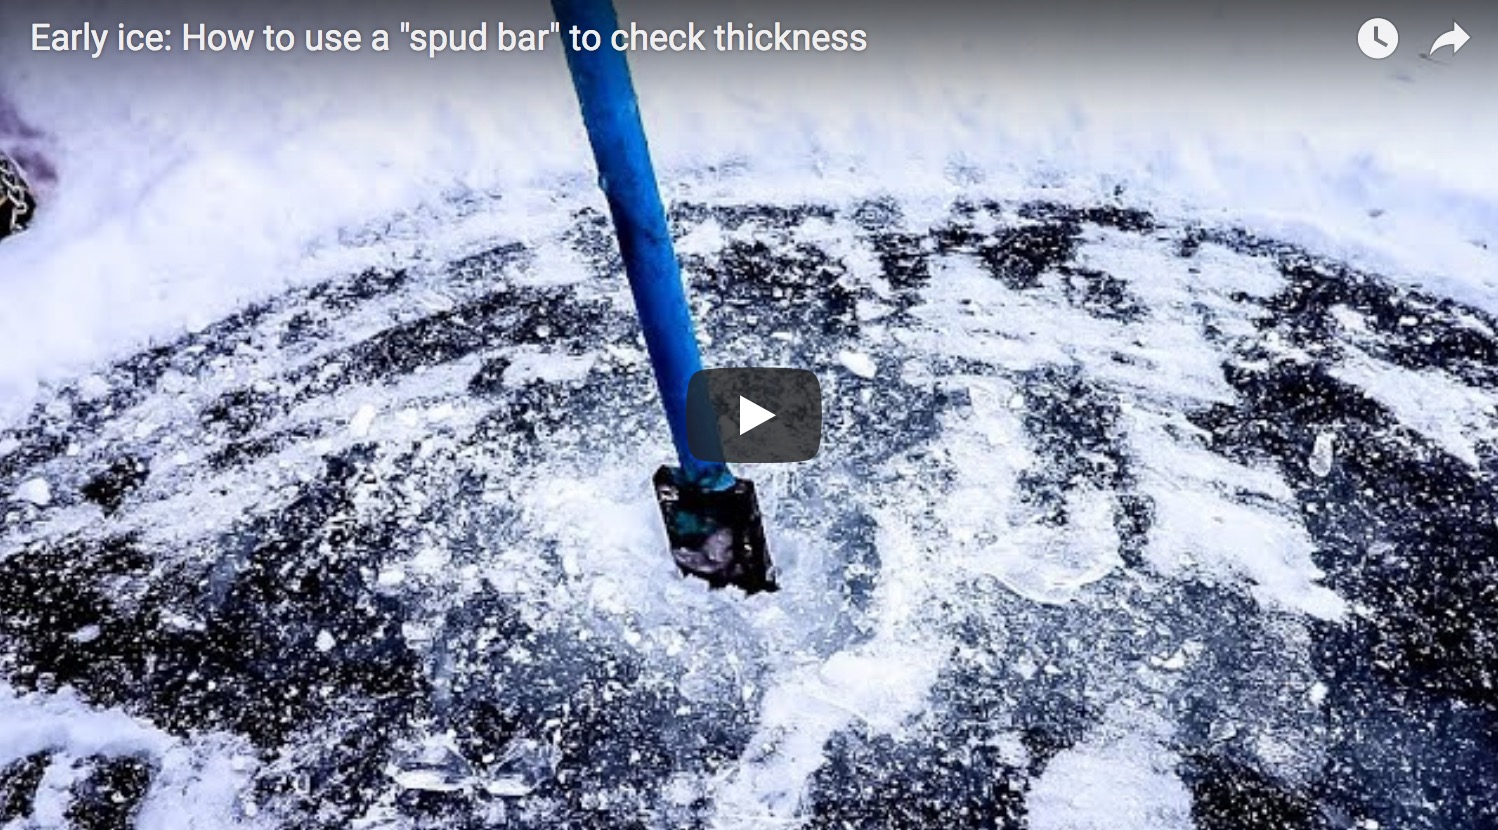 Earlyice safety How to use a “spud bar” to check ice